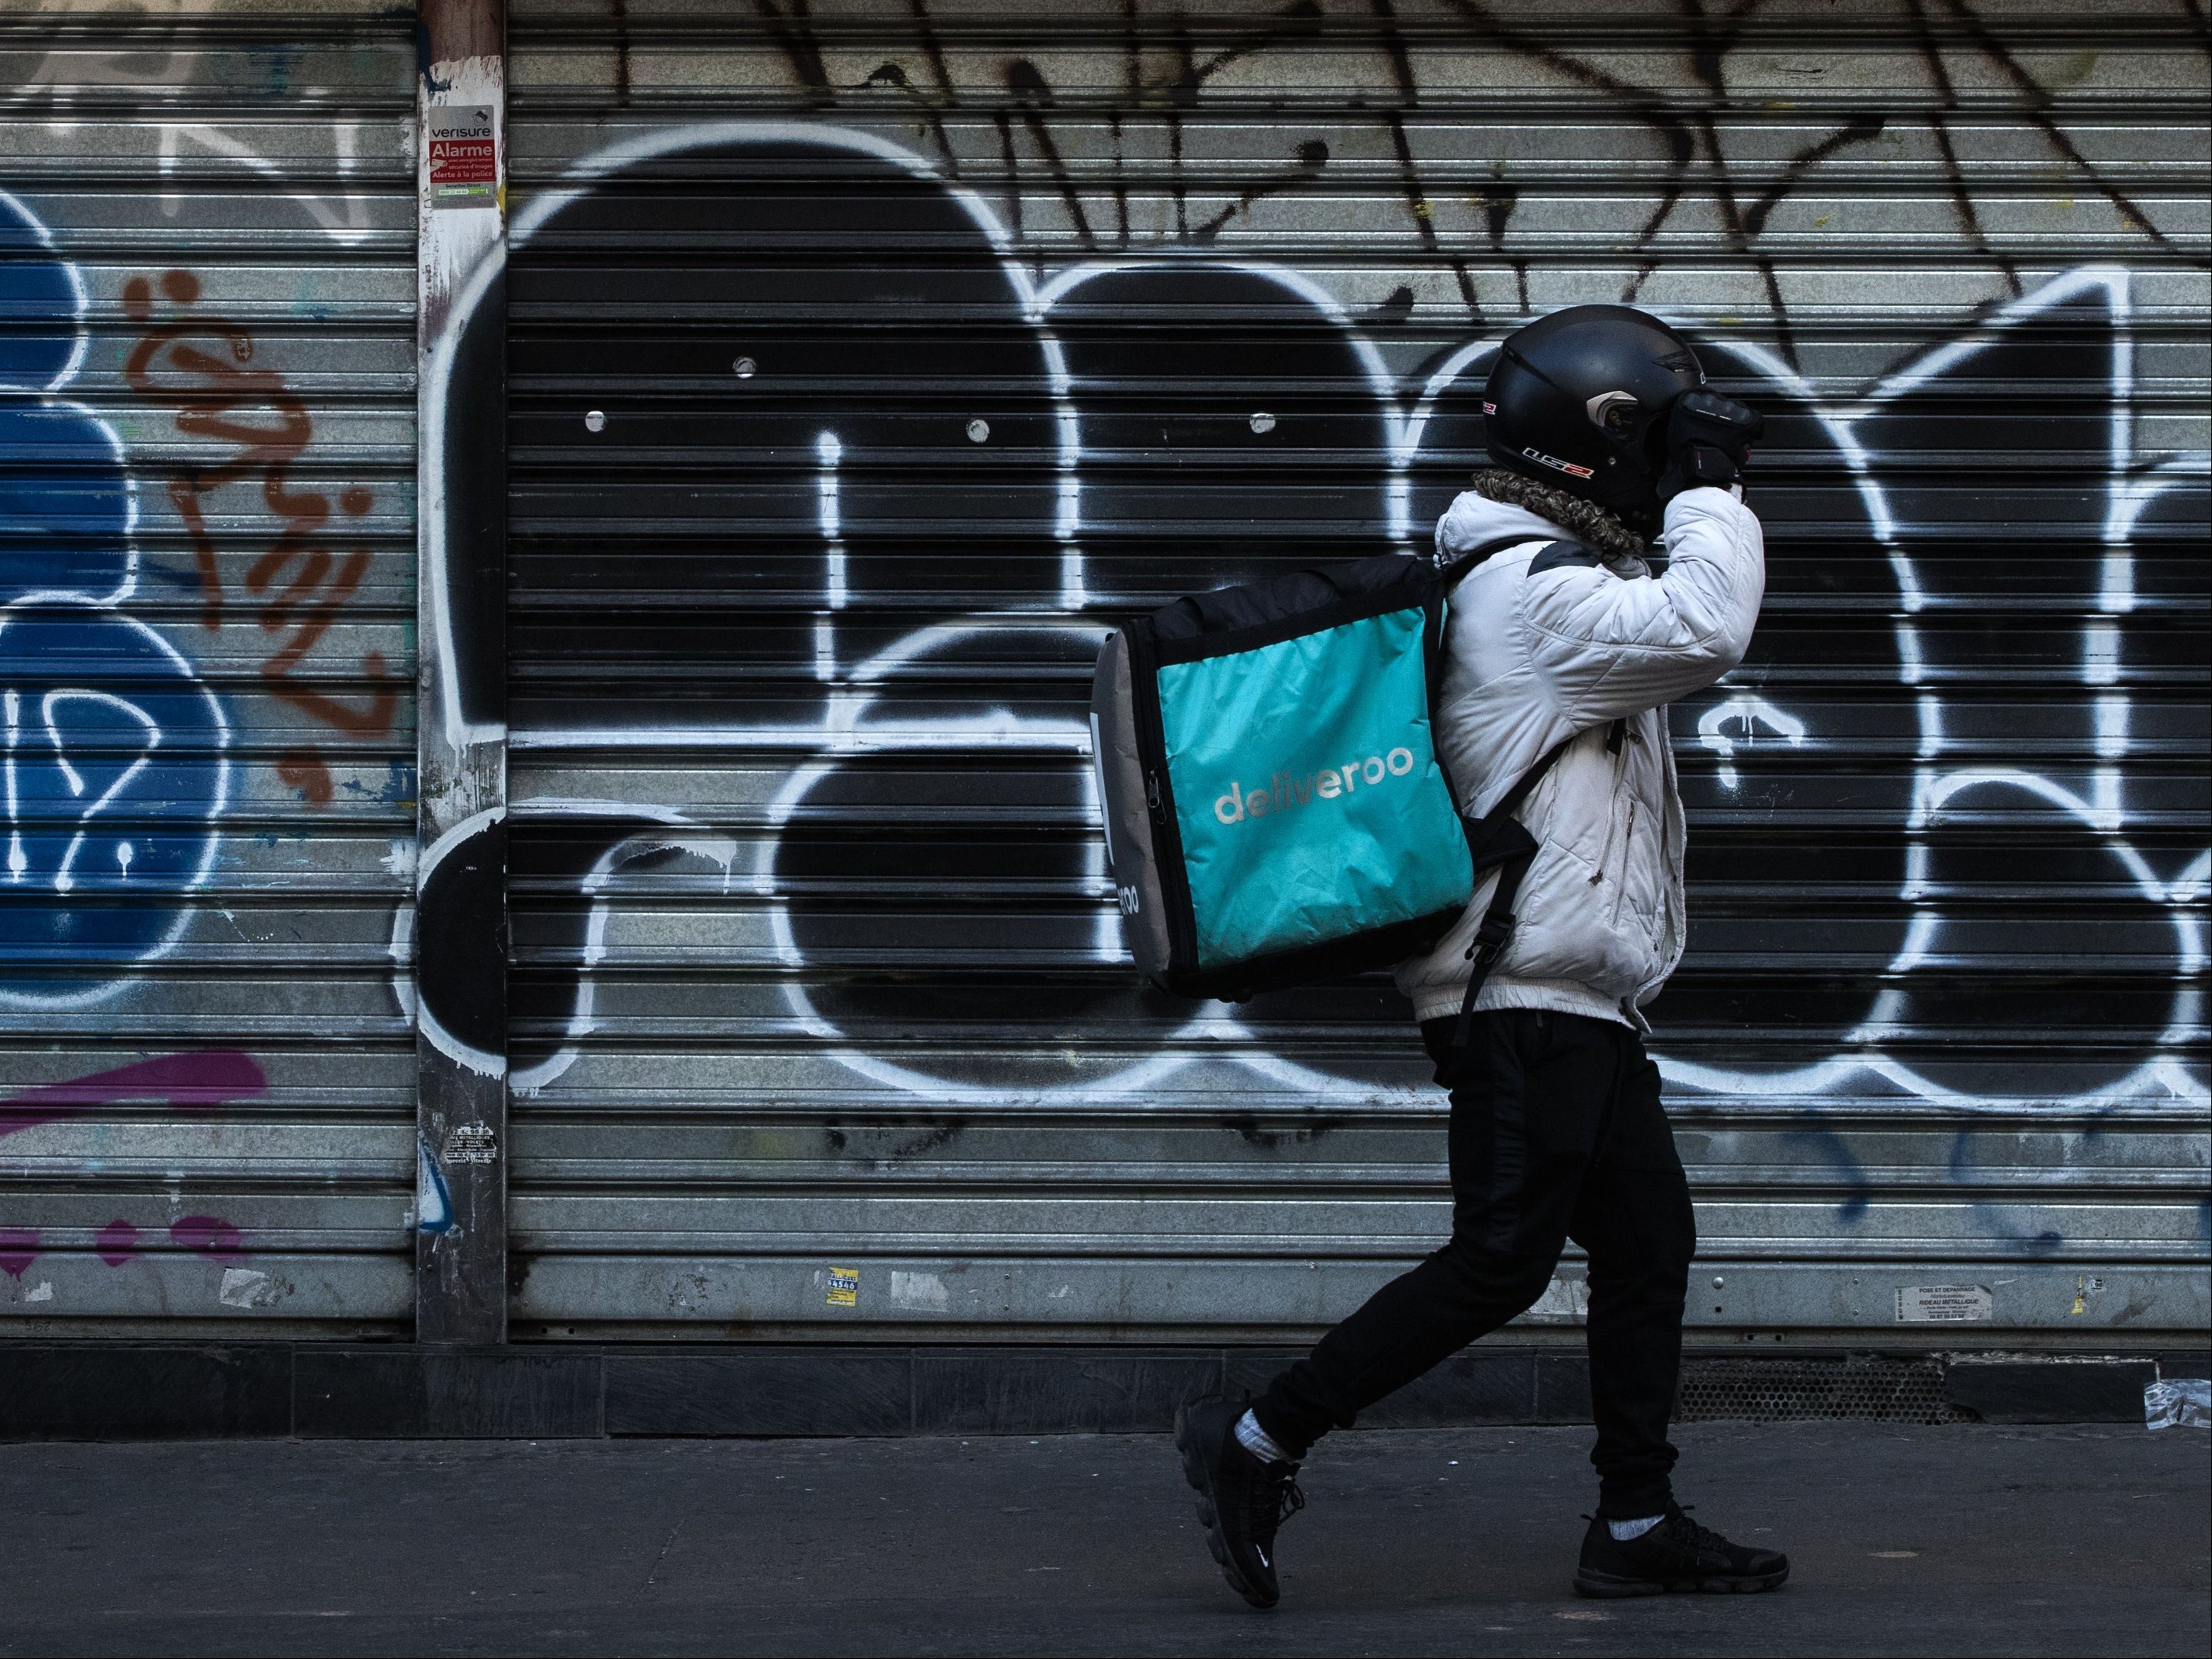 The Independent Workers’ Union of Great Britain expects hundreds of Deliveroo riders to refuse to carry out deliveries in protest